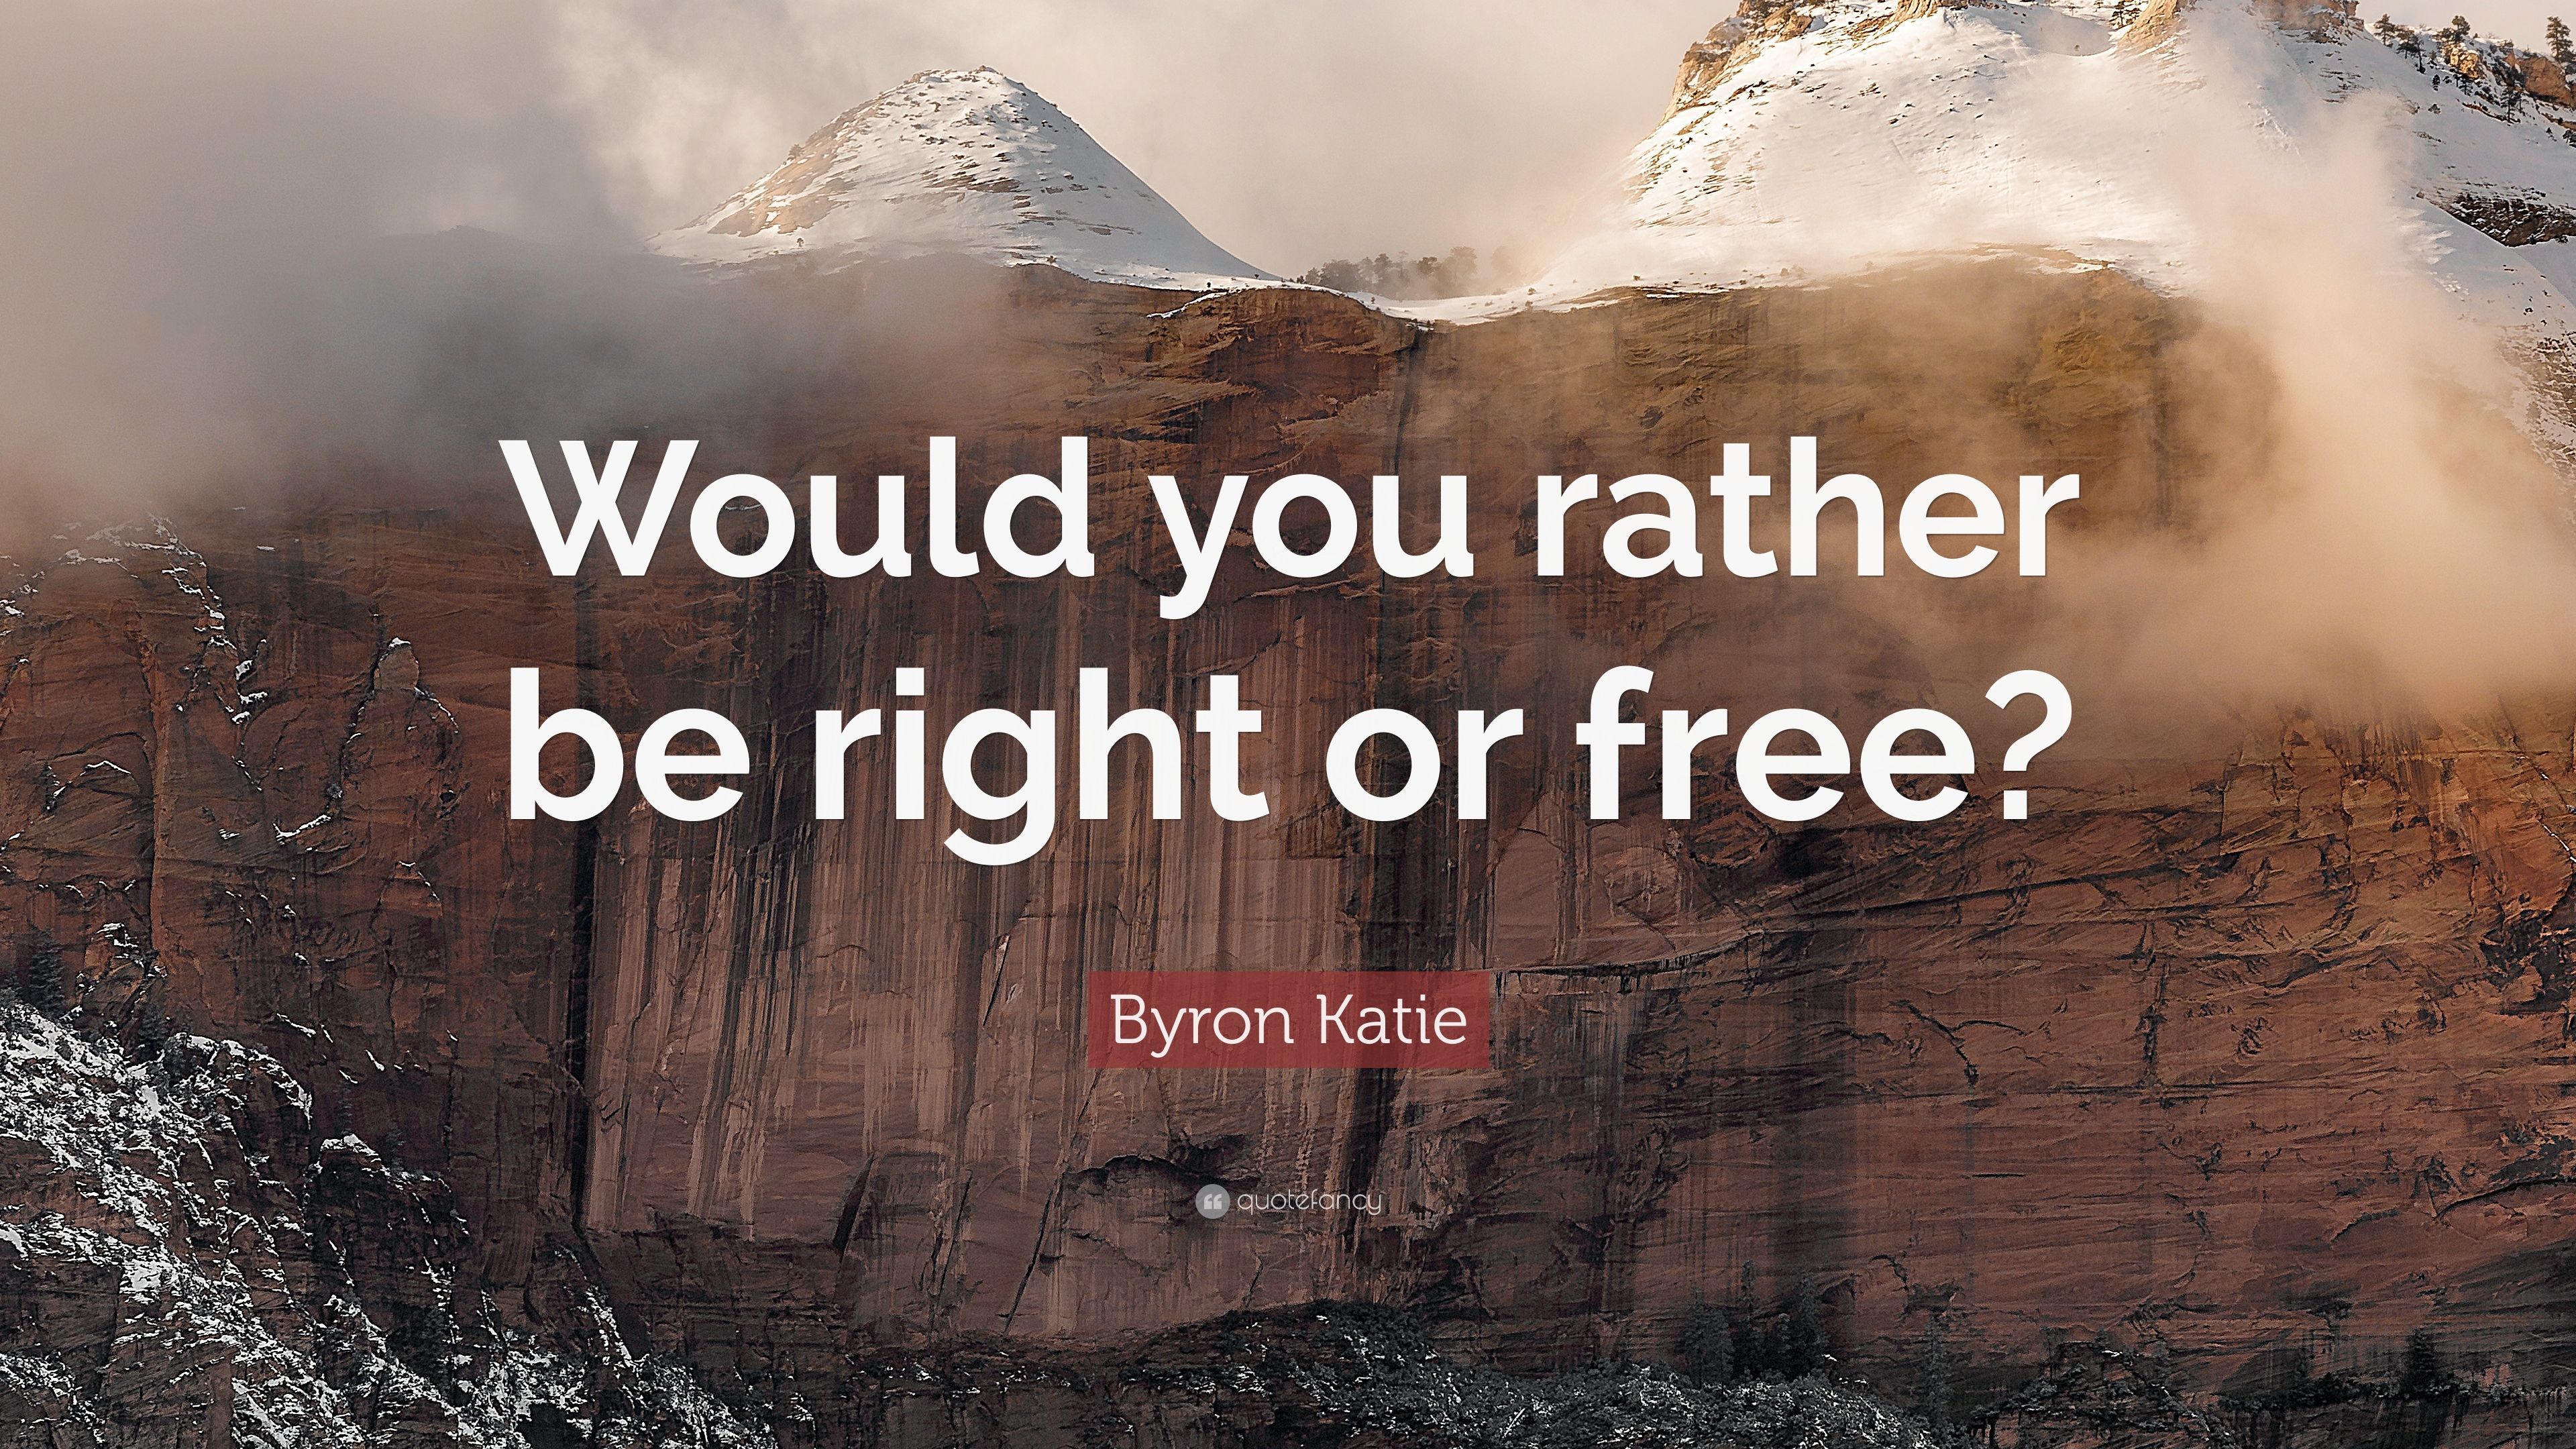 Byron Katie Quote: “Would you rather be right or free?” (7 wallpaper)